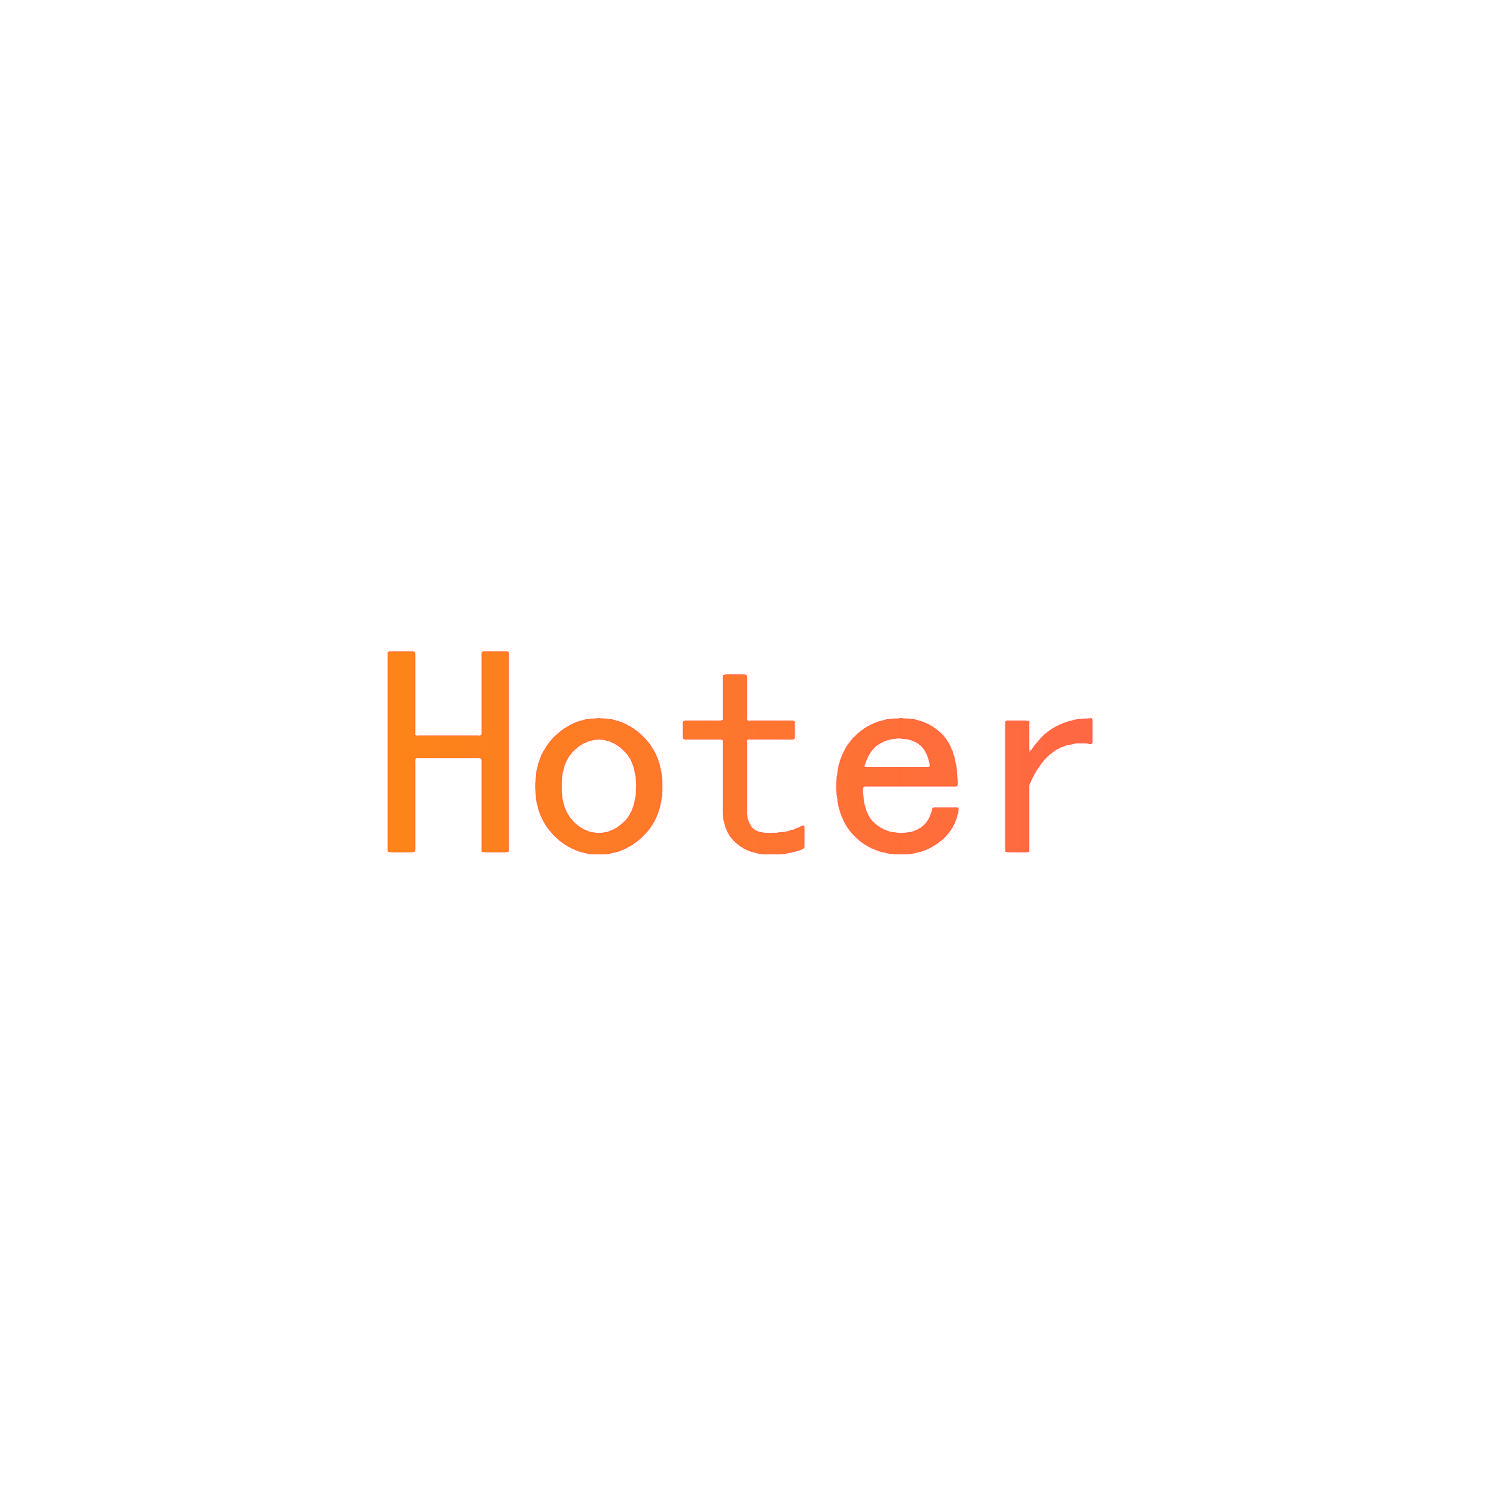 HOTER